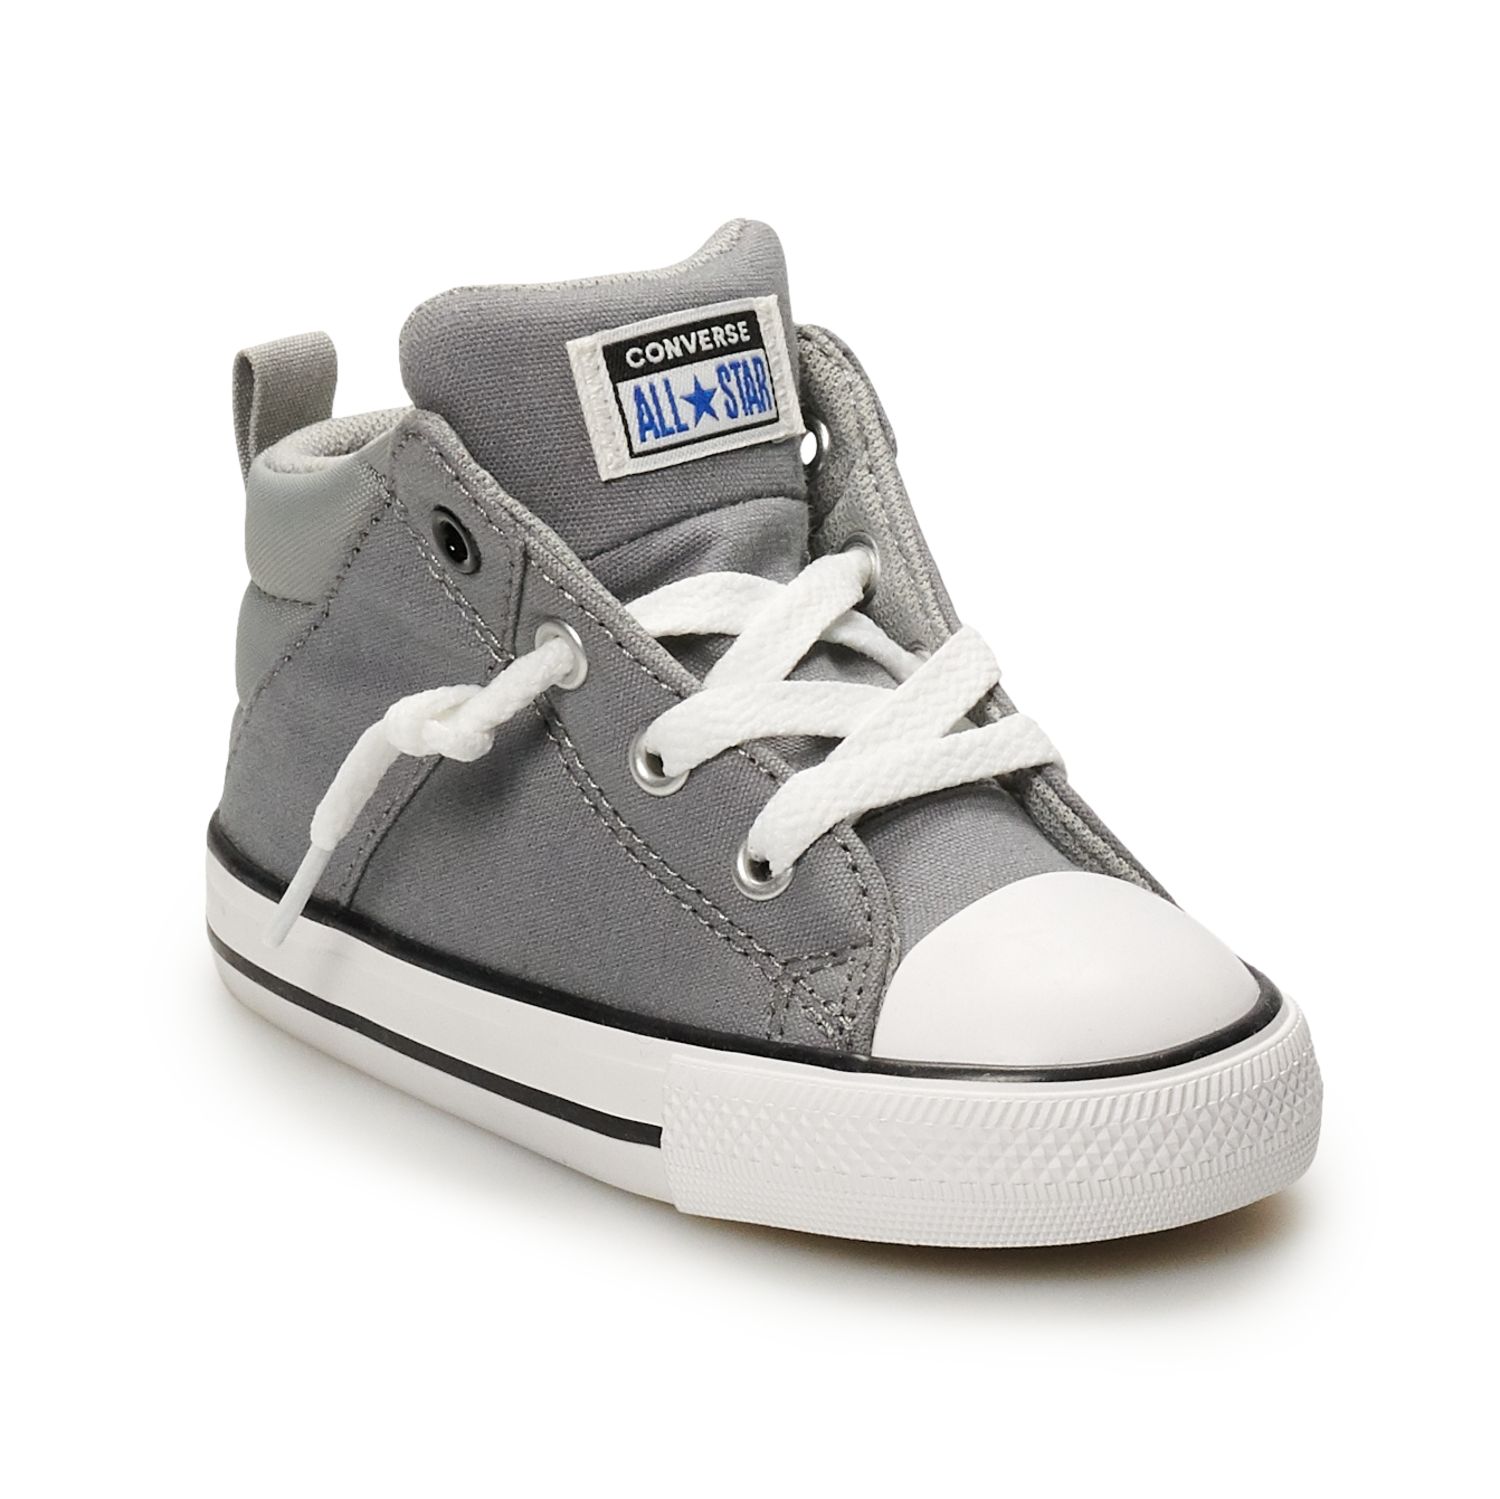 grey baby shoes